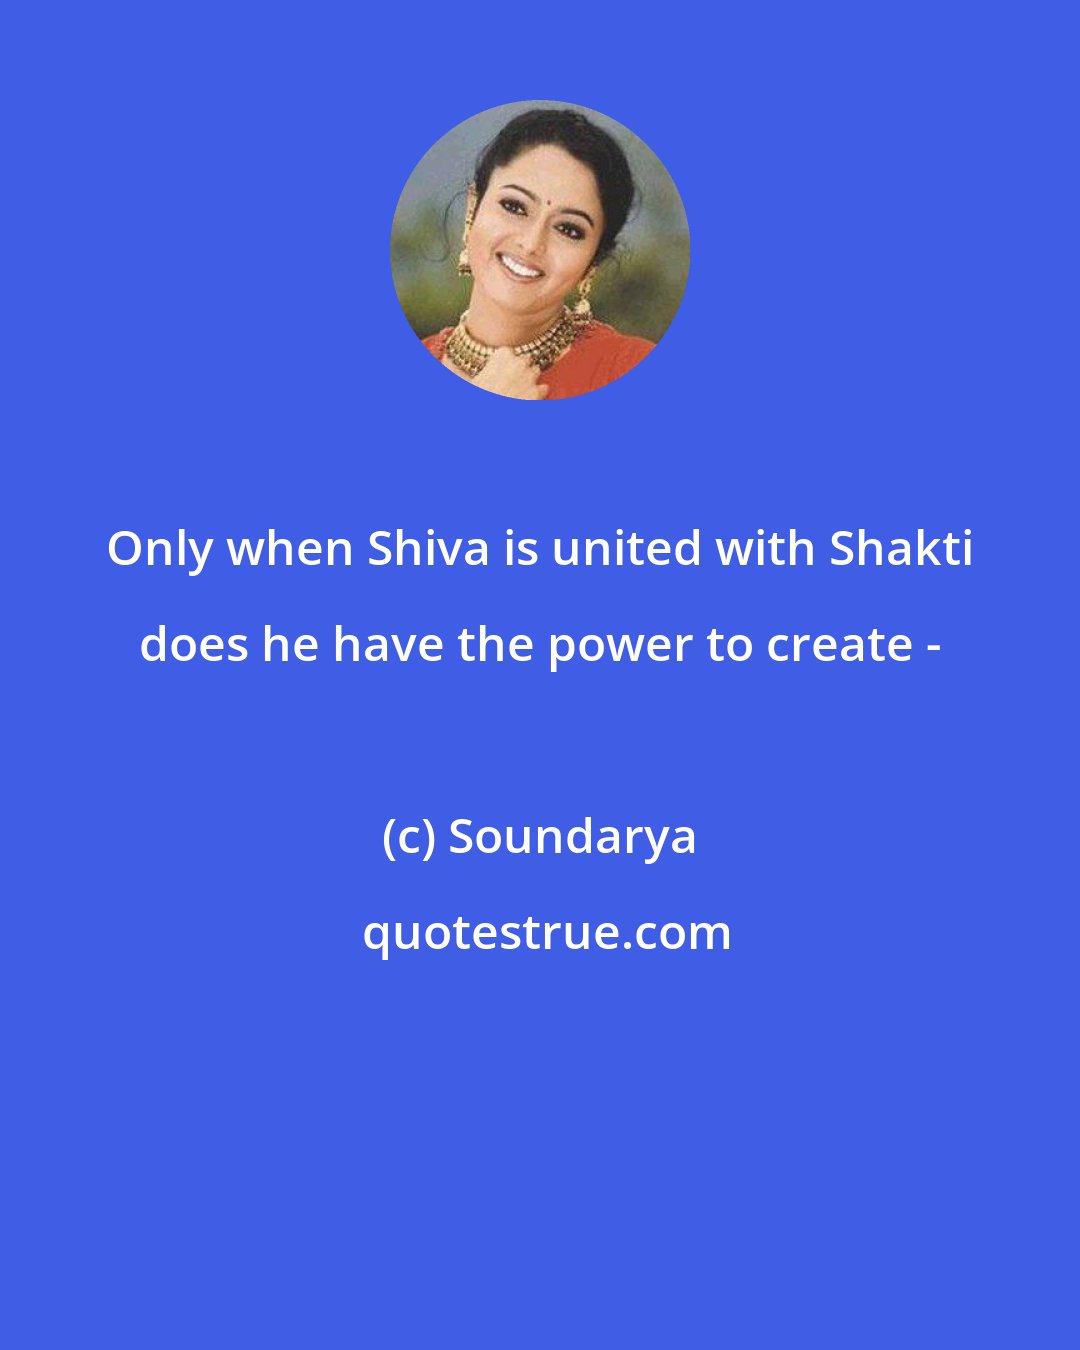 Soundarya: Only when Shiva is united with Shakti does he have the power to create -